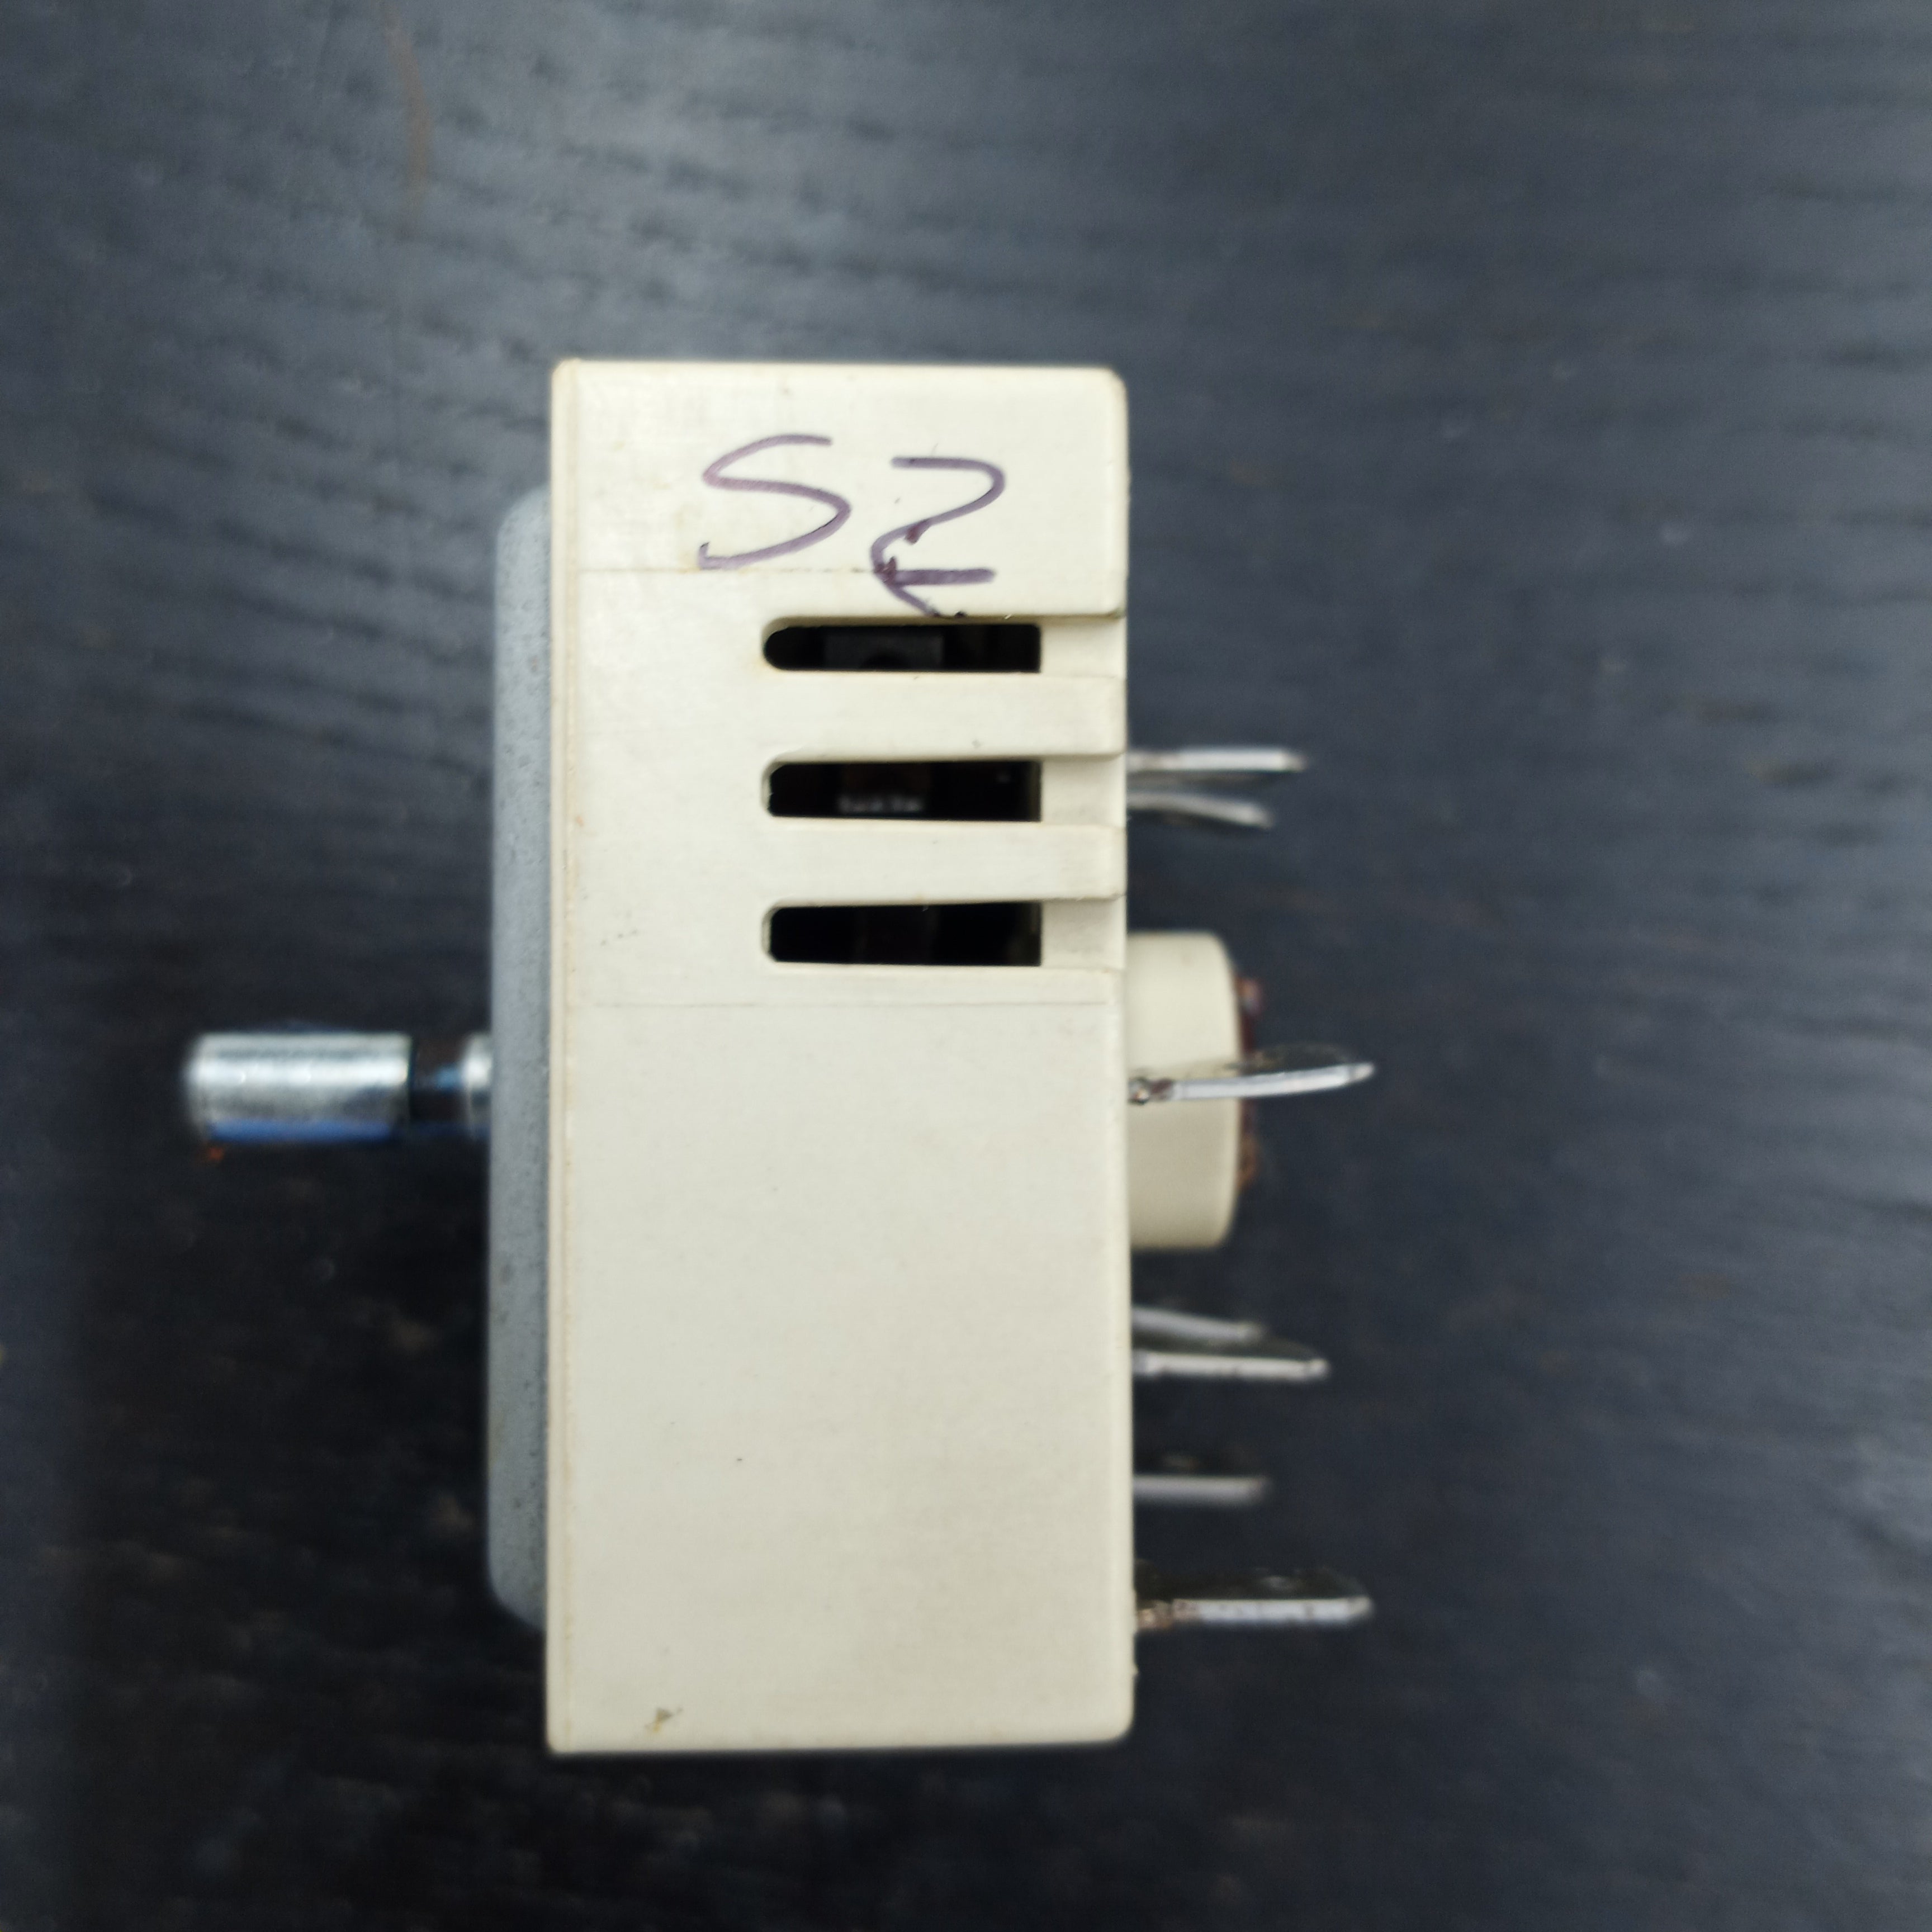 Whirlpool Range Surface Element Control Switch WP9758060